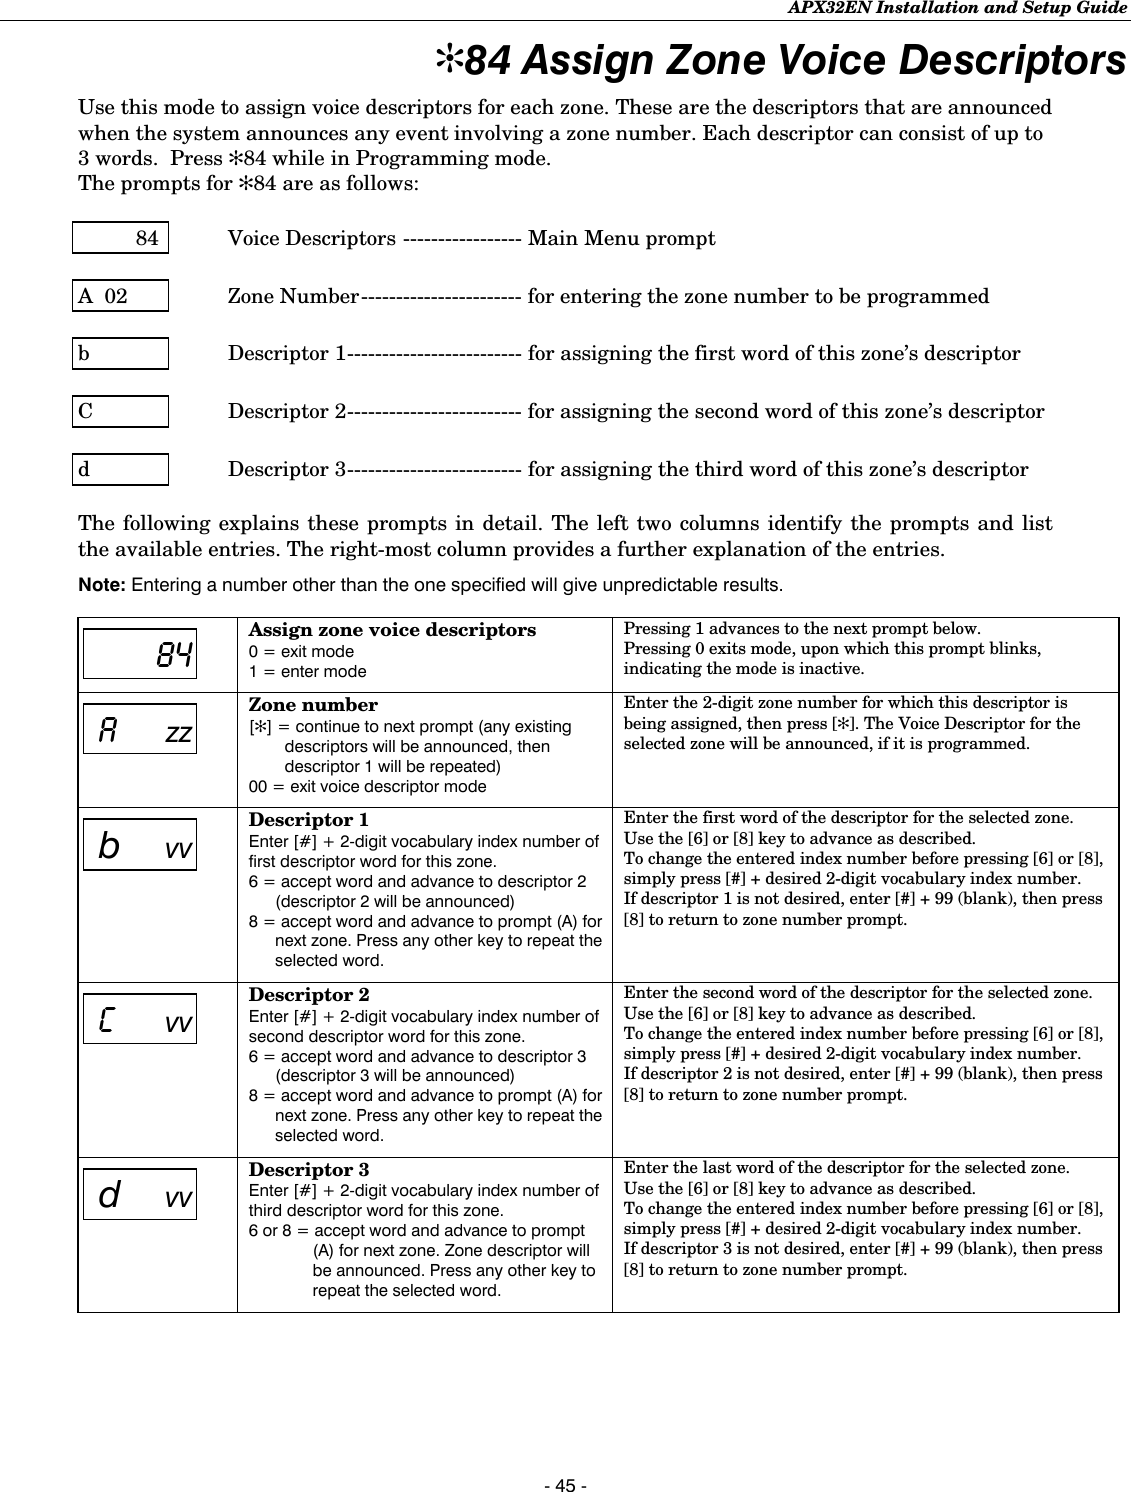 APX32EN Installation and Setup Guide  - 45 - ✻84 Assign Zone Voice Descriptors  Use this mode to assign voice descriptors for each zone. These are the descriptors that are announced when the system announces any event involving a zone number. Each descriptor can consist of up to 3 words.  Press ✻84 while in Programming mode. The prompts for ✻84 are as follows:            84  Voice Descriptors ----------------- Main Menu prompt  A  02  Zone Number----------------------- for entering the zone number to be programmed  b   Descriptor 1------------------------- for assigning the first word of this zone’s descriptor  C  Descriptor 2------------------------- for assigning the second word of this zone’s descriptor  d  Descriptor 3------------------------- for assigning the third word of this zone’s descriptor  The following explains these prompts in detail. The left two columns identify the prompts and list the available entries. The right-most column provides a further explanation of the entries. Note: Entering a number other than the one specified will give unpredictable results.      84 Assign zone voice descriptors 0 = exit mode 1 = enter mode  Pressing 1 advances to the next prompt below. Pressing 0 exits mode, upon which this prompt blinks, indicating the mode is inactive.    A  zz Zone number [✻] = continue to next prompt (any existing descriptors will be announced, then descriptor 1 will be repeated) 00 = exit voice descriptor mode  Enter the 2-digit zone number for which this descriptor is being assigned, then press [✻]. The Voice Descriptor for the selected zone will be announced, if it is programmed.   b vv Descriptor 1 Enter [#] + 2-digit vocabulary index number of first descriptor word for this zone. 6 = accept word and advance to descriptor 2 (descriptor 2 will be announced) 8 = accept word and advance to prompt (A) for next zone. Press any other key to repeat the selected word.  Enter the first word of the descriptor for the selected zone. Use the [6] or [8] key to advance as described.  To change the entered index number before pressing [6] or [8], simply press [#] + desired 2-digit vocabulary index number.  If descriptor 1 is not desired, enter [#] + 99 (blank), then press [8] to return to zone number prompt.   C vv Descriptor 2 Enter [#] + 2-digit vocabulary index number of second descriptor word for this zone. 6 = accept word and advance to descriptor 3 (descriptor 3 will be announced) 8 = accept word and advance to prompt (A) for next zone. Press any other key to repeat the selected word.  Enter the second word of the descriptor for the selected zone. Use the [6] or [8] key to advance as described.  To change the entered index number before pressing [6] or [8], simply press [#] + desired 2-digit vocabulary index number.  If descriptor 2 is not desired, enter [#] + 99 (blank), then press [8] to return to zone number prompt.    d vv Descriptor 3 Enter [#] + 2-digit vocabulary index number of third descriptor word for this zone. 6 or 8 = accept word and advance to prompt (A) for next zone. Zone descriptor will be announced. Press any other key to repeat the selected word.  Enter the last word of the descriptor for the selected zone. Use the [6] or [8] key to advance as described.  To change the entered index number before pressing [6] or [8], simply press [#] + desired 2-digit vocabulary index number.  If descriptor 3 is not desired, enter [#] + 99 (blank), then press [8] to return to zone number prompt.      